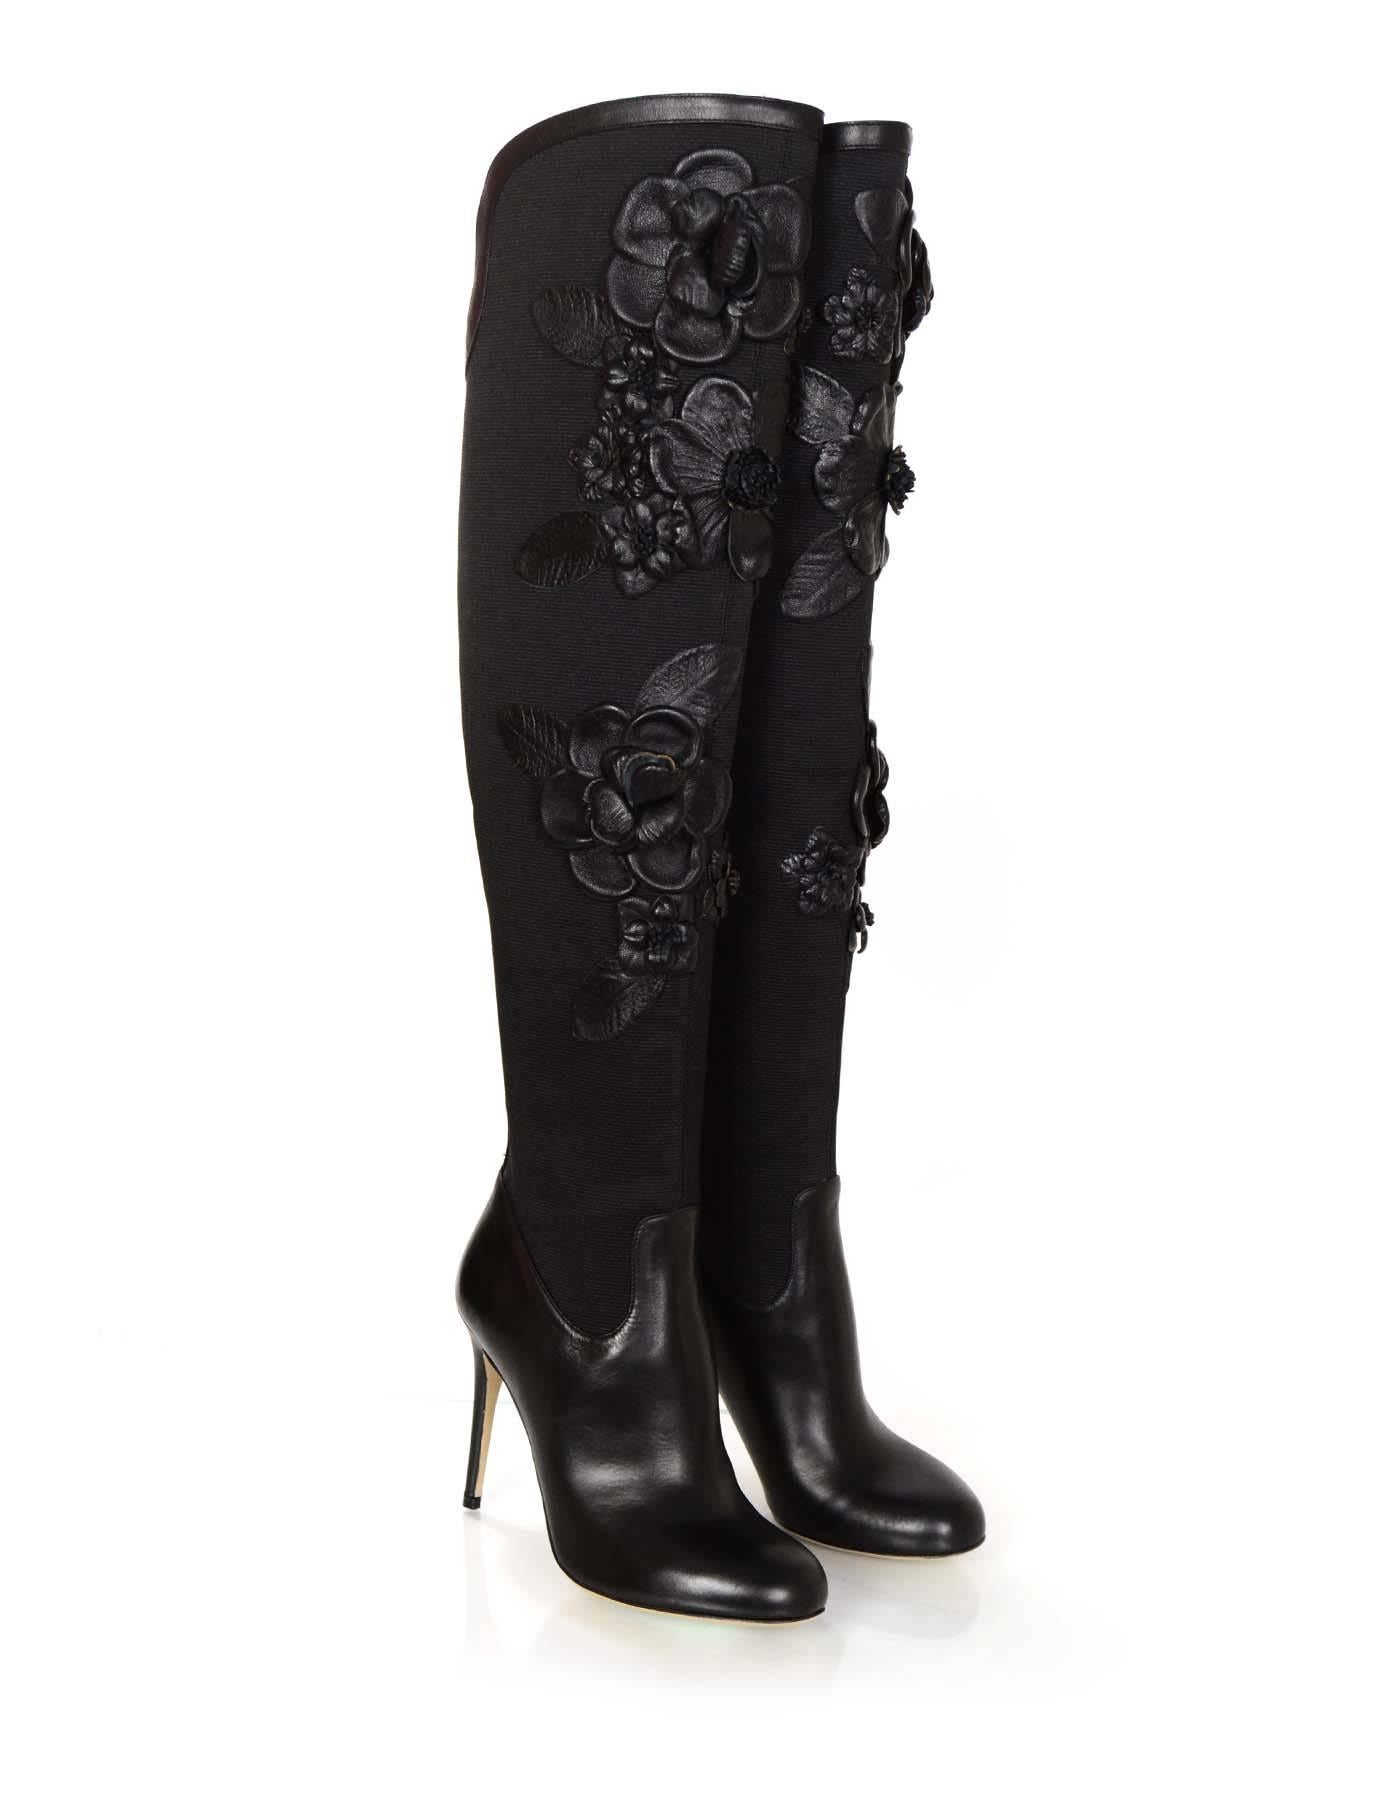 Valentino Black Floral Applique Boots Sz 37 rt. $2, 175 In Excellent Condition In New York, NY